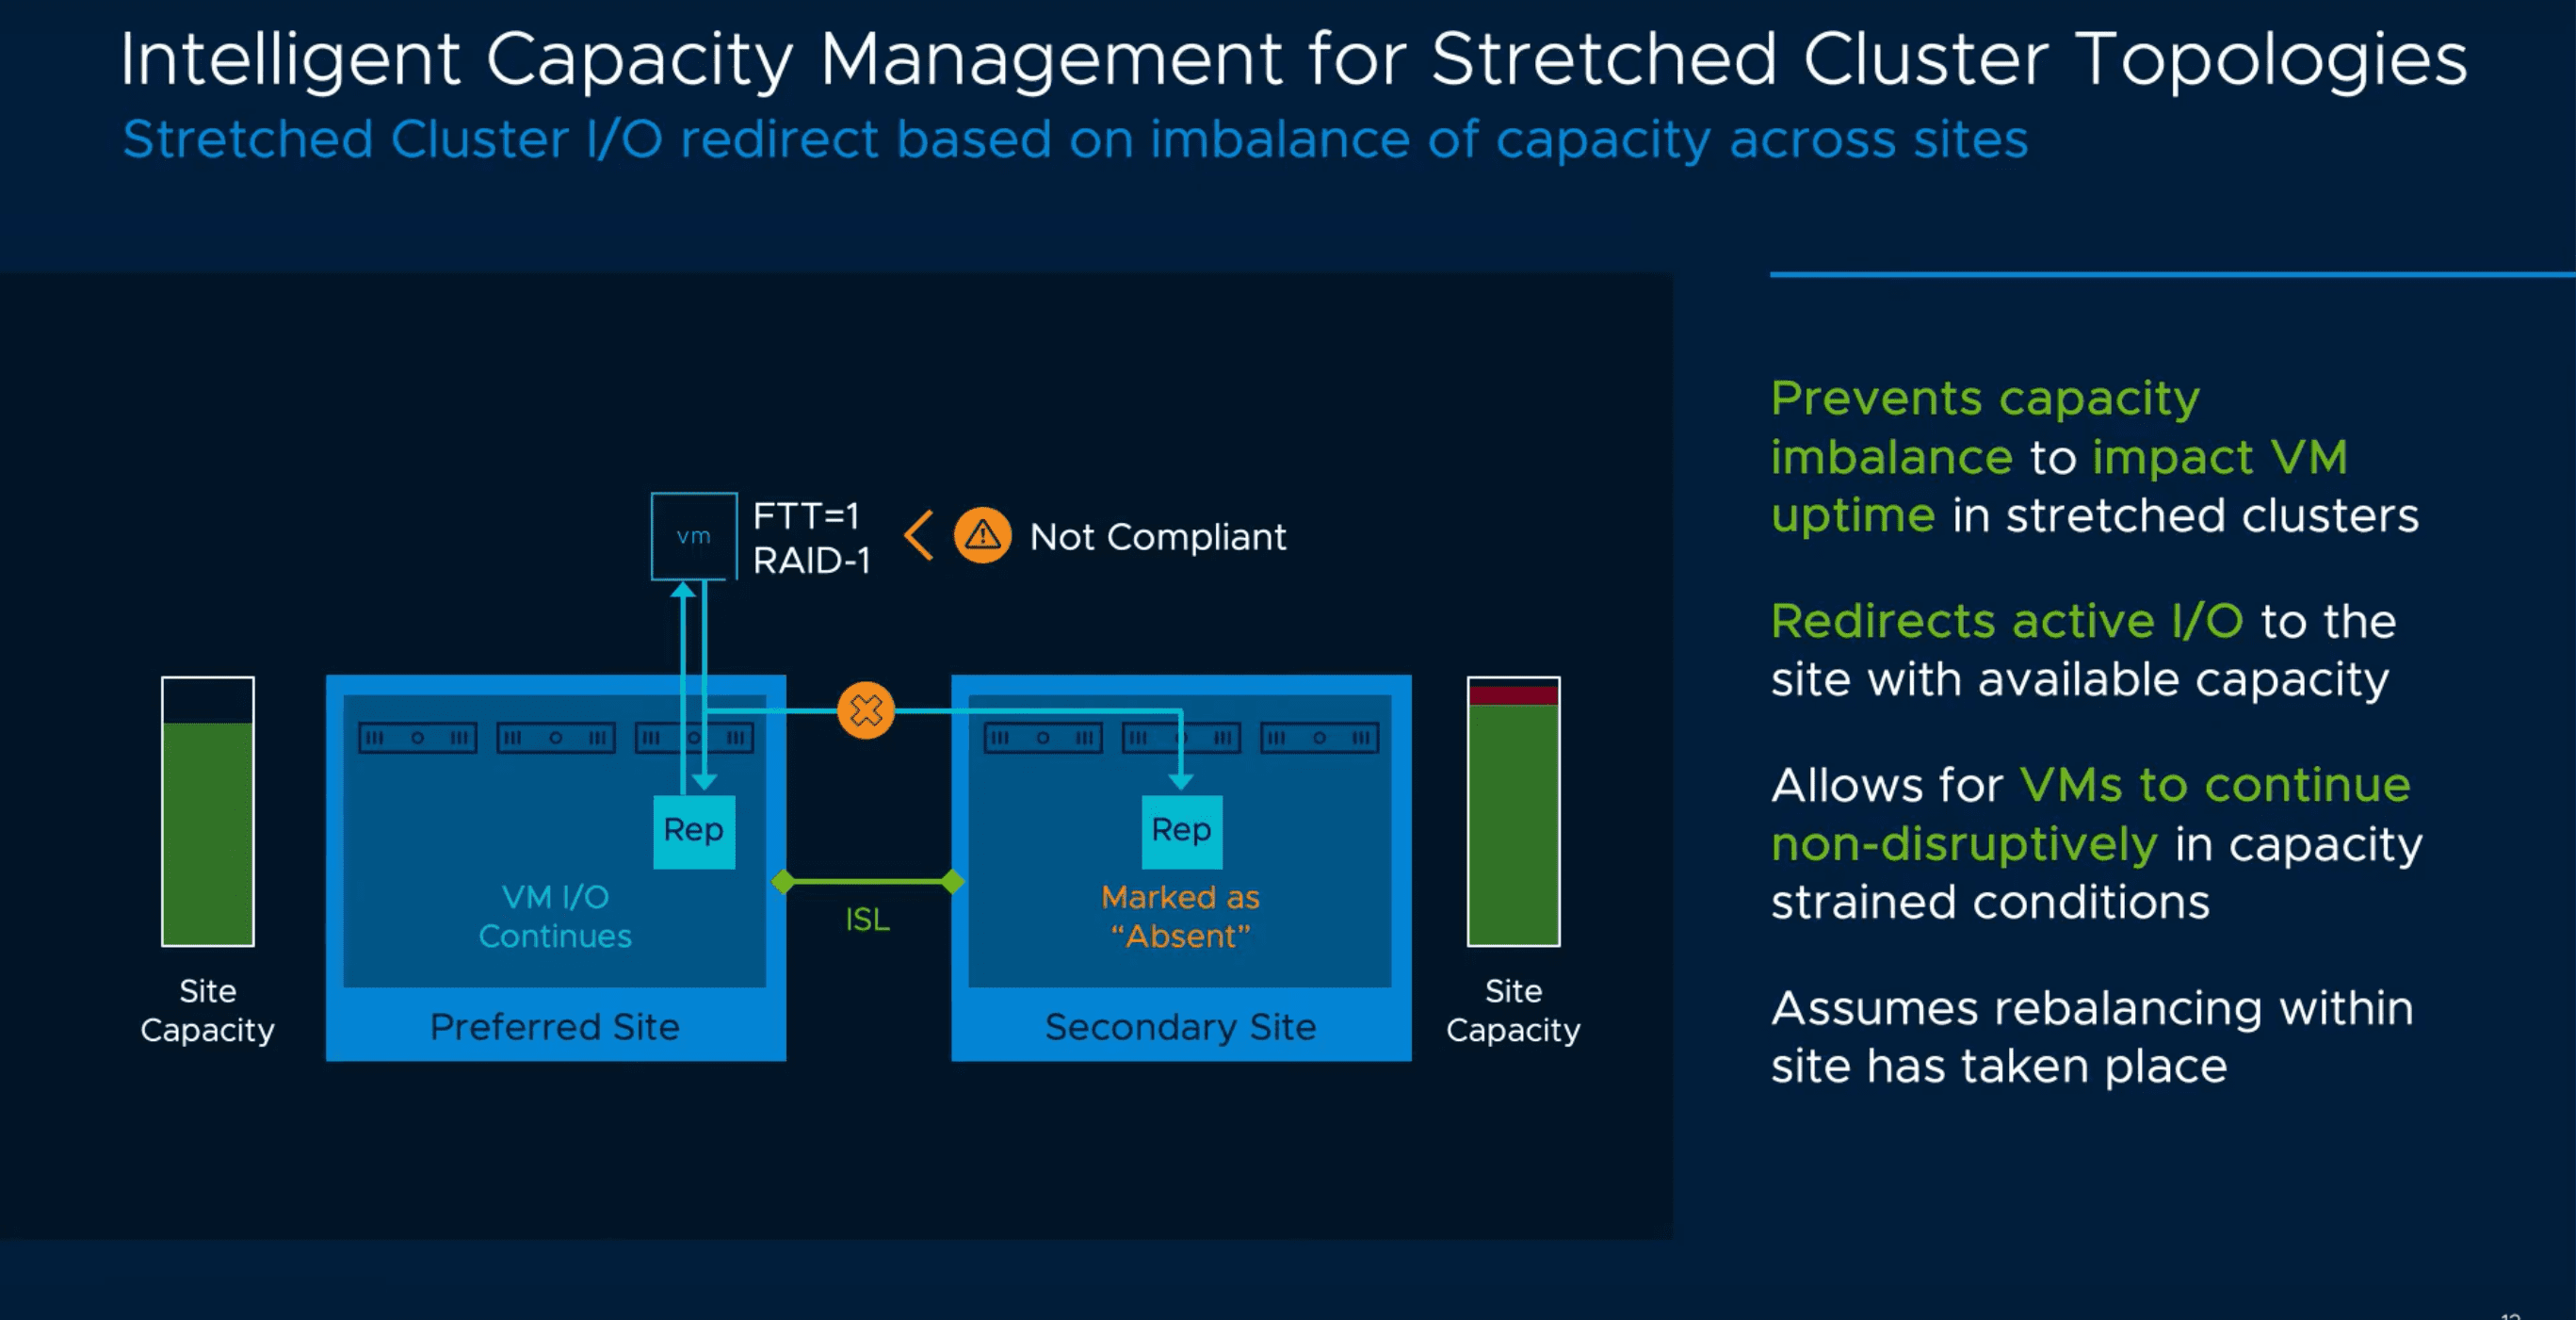 Intelligent-capacity-management-for-stretched-cluster-topologies-in-vSAN-7.0